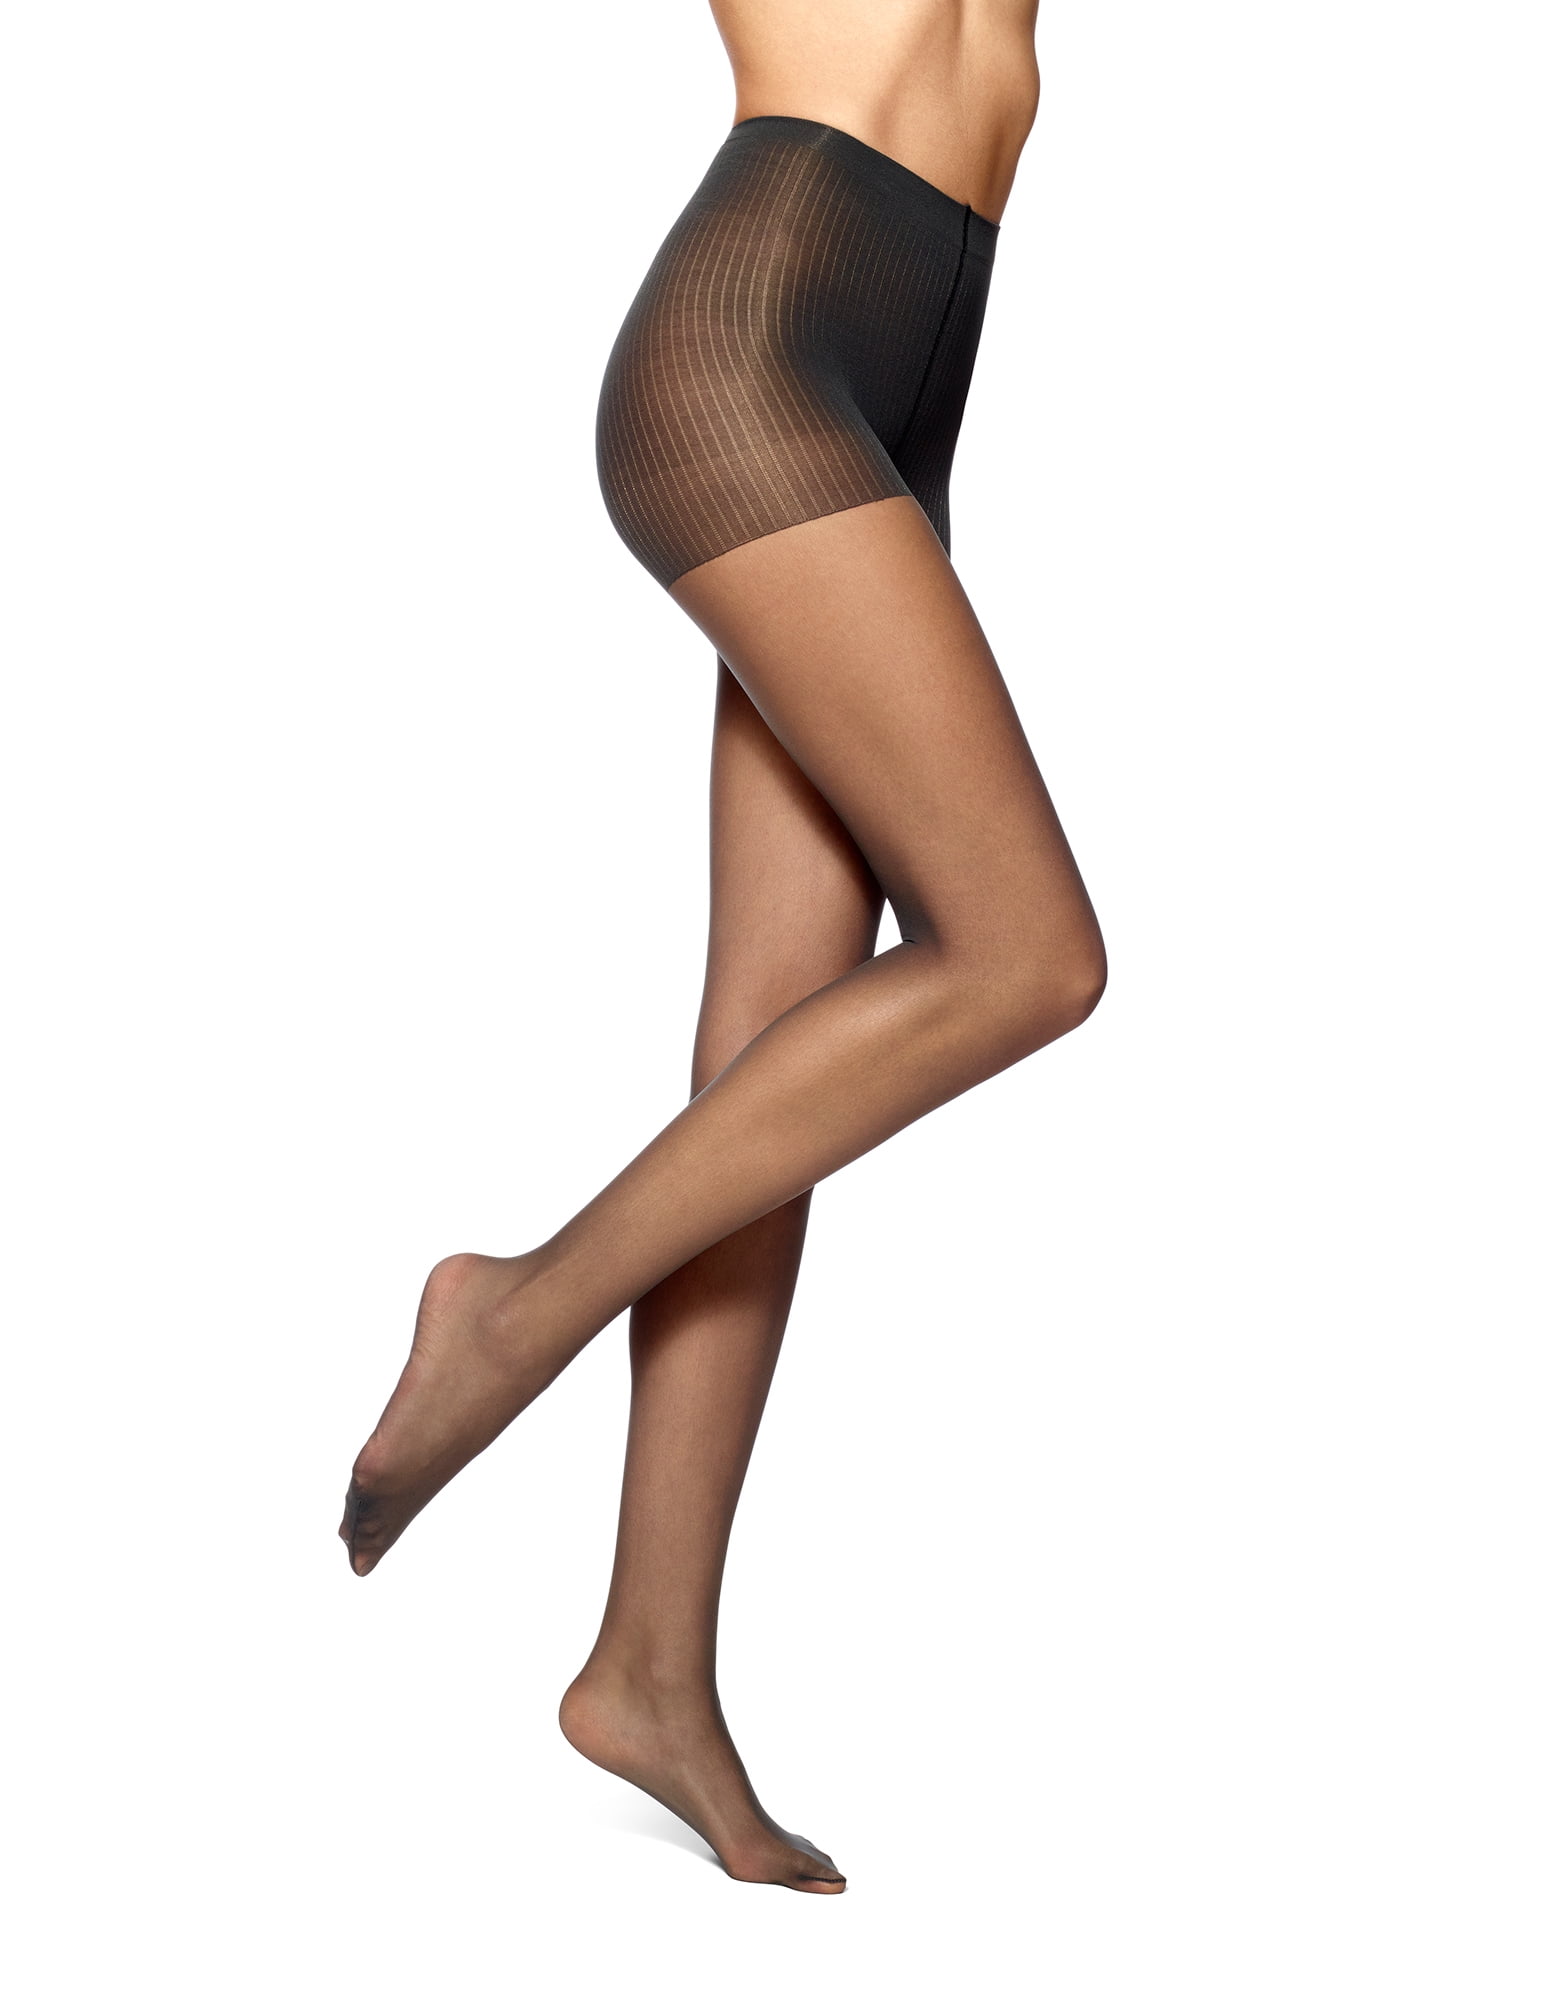 No Nonsense Women's Control Top Pantyhose 3 Pair Value Pack Nude Q 